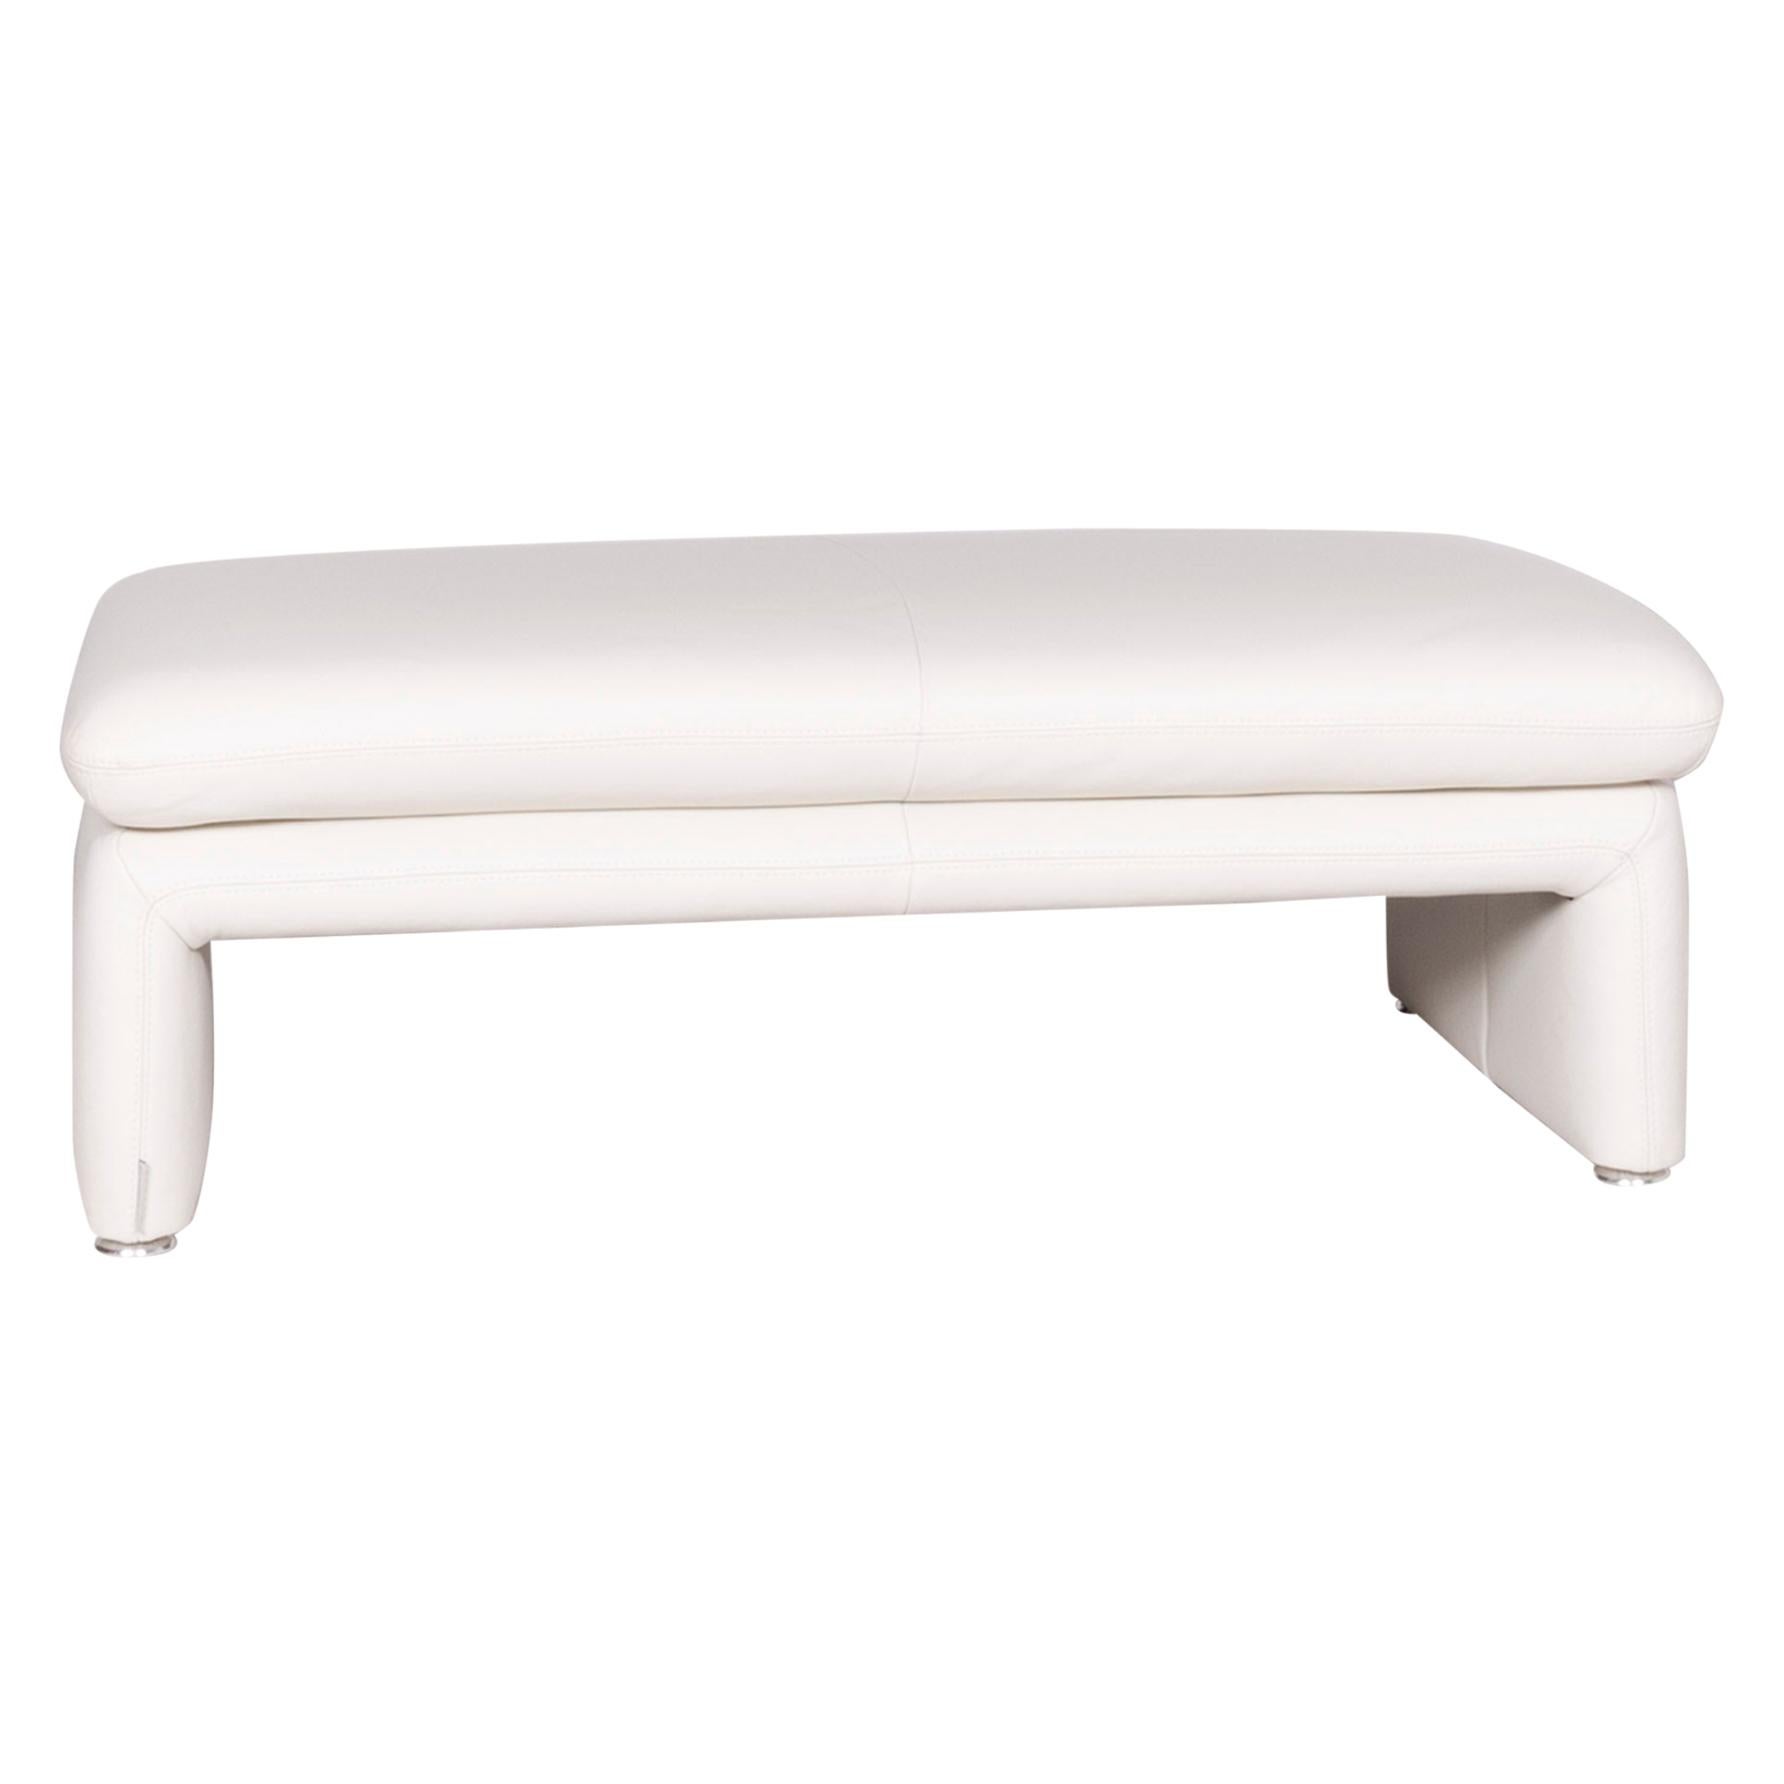 Willi Schillig Brooklyn Designer Leather Stool White Genuine Leather Stool For Sale